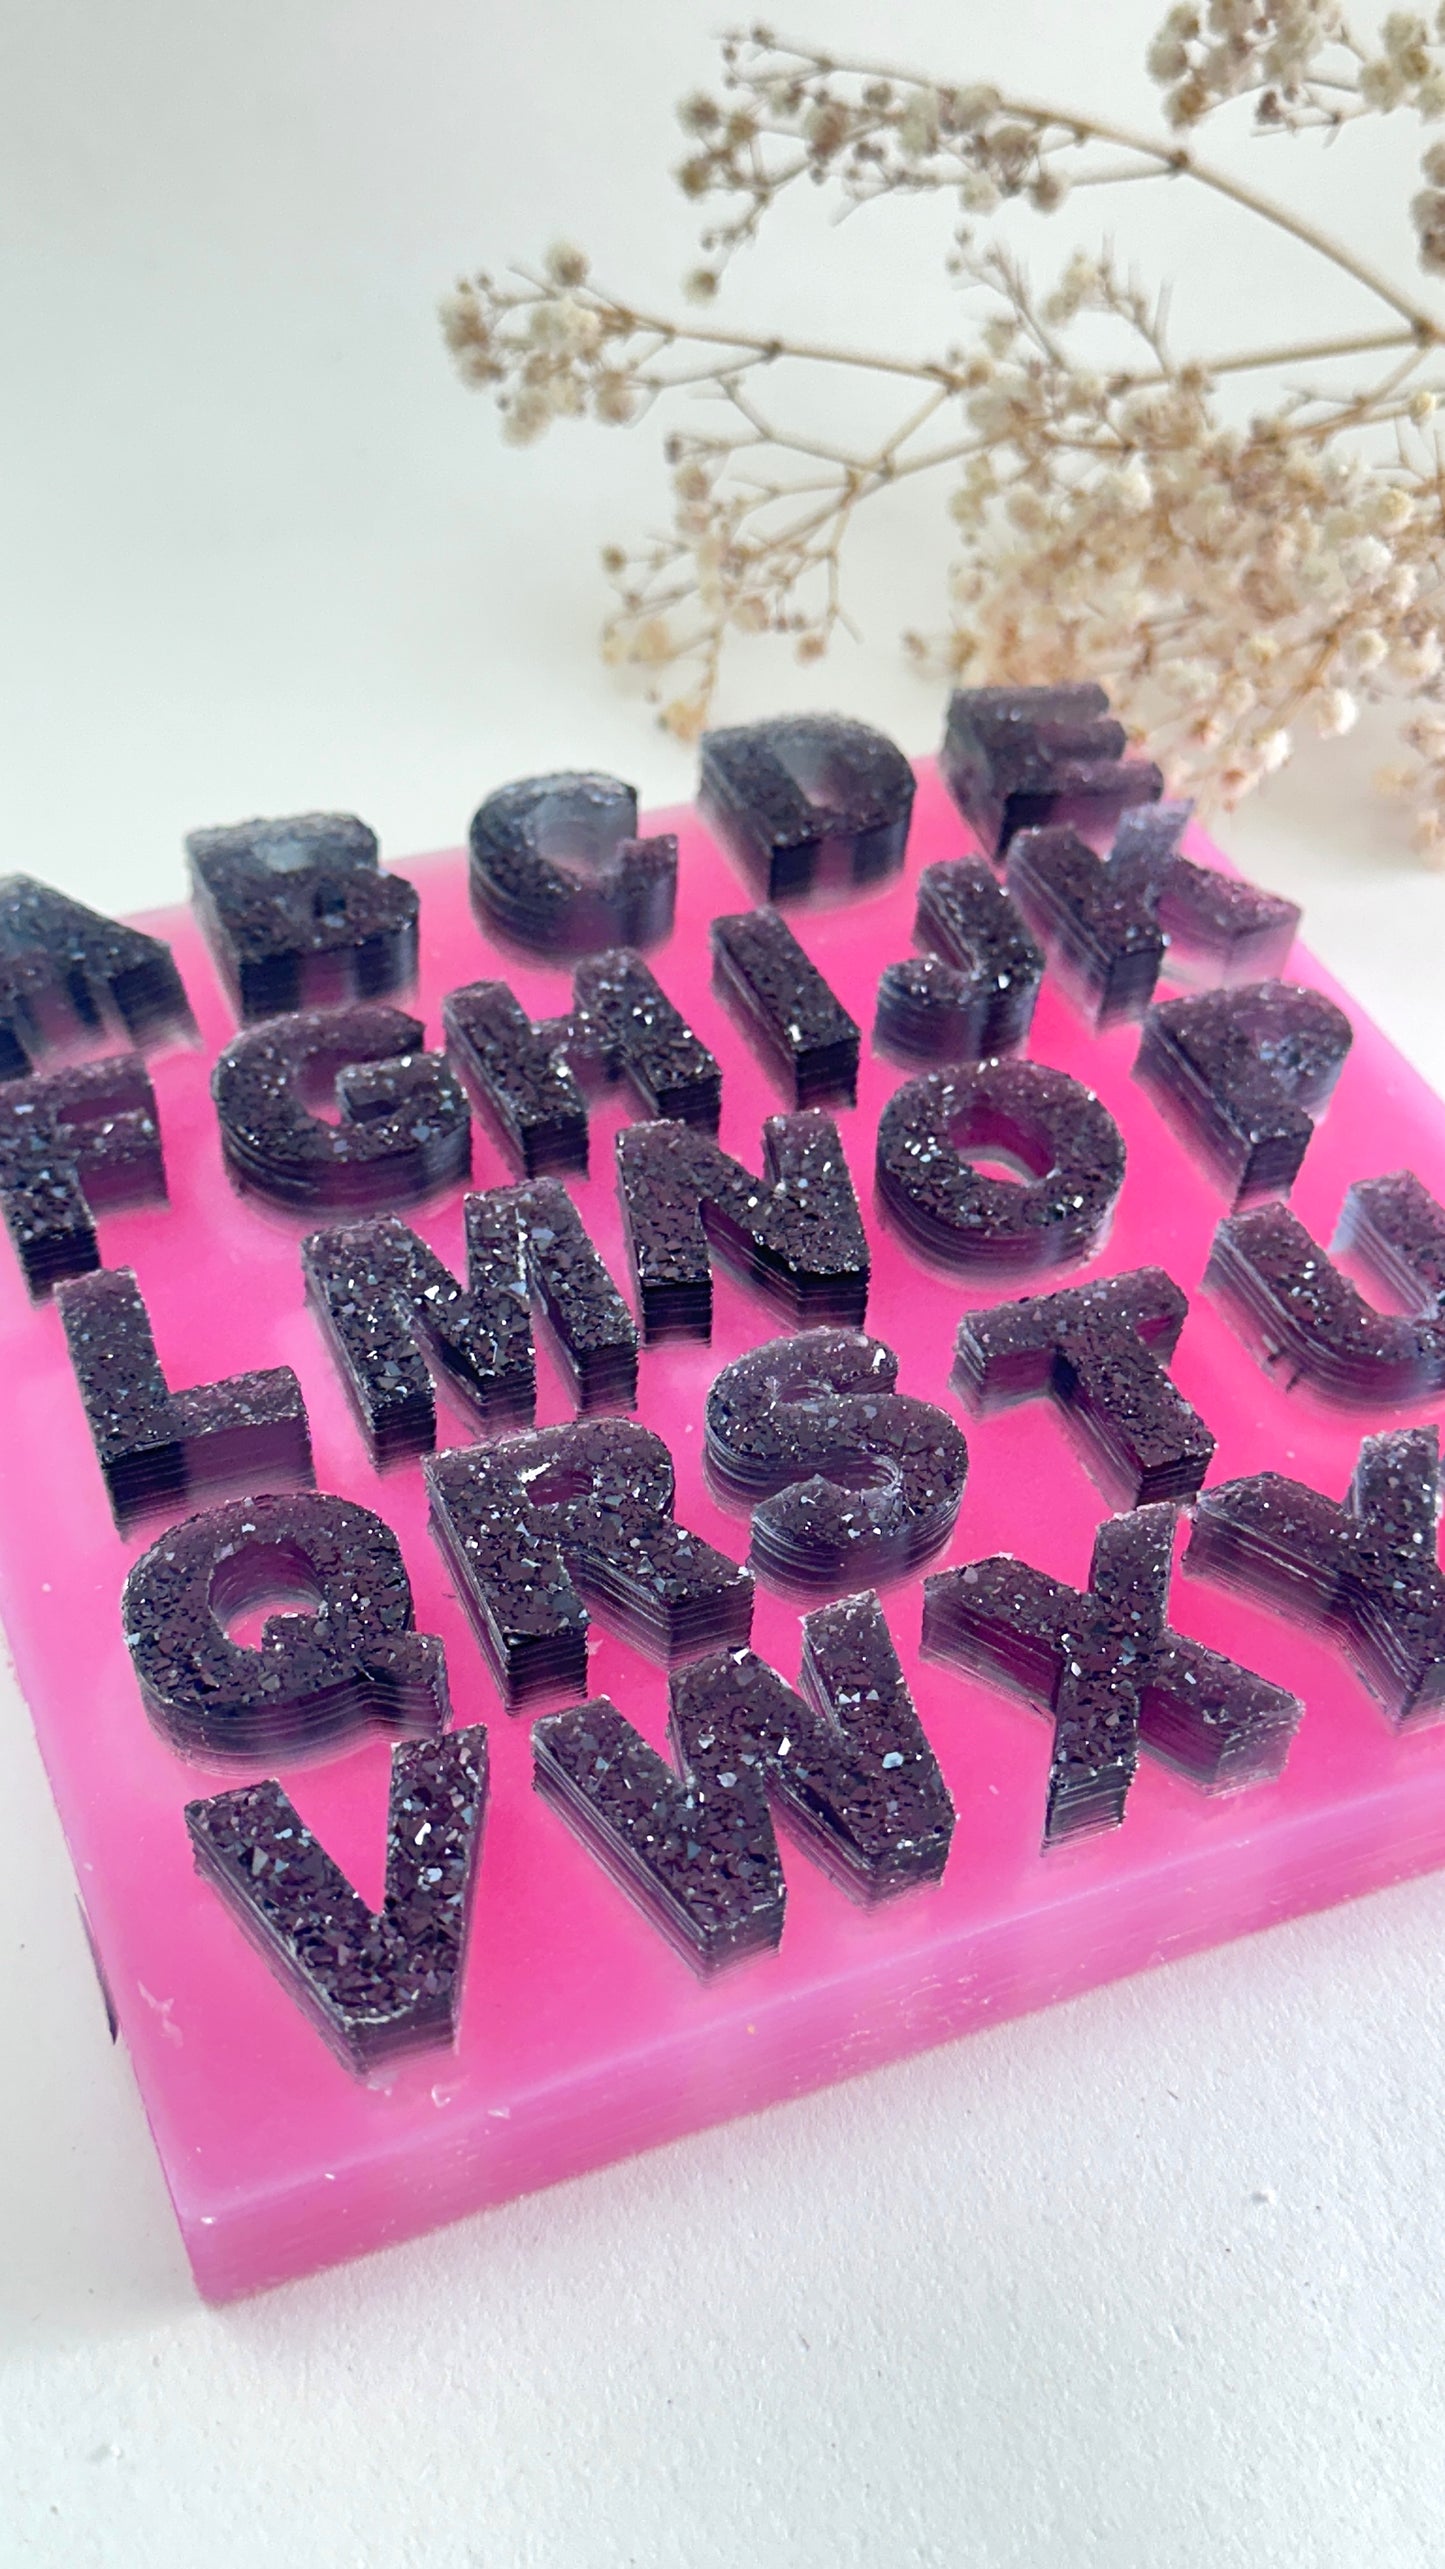 Stunning Silicone Mold with Crystals Alphabet, Artistic Resin Casting Tool